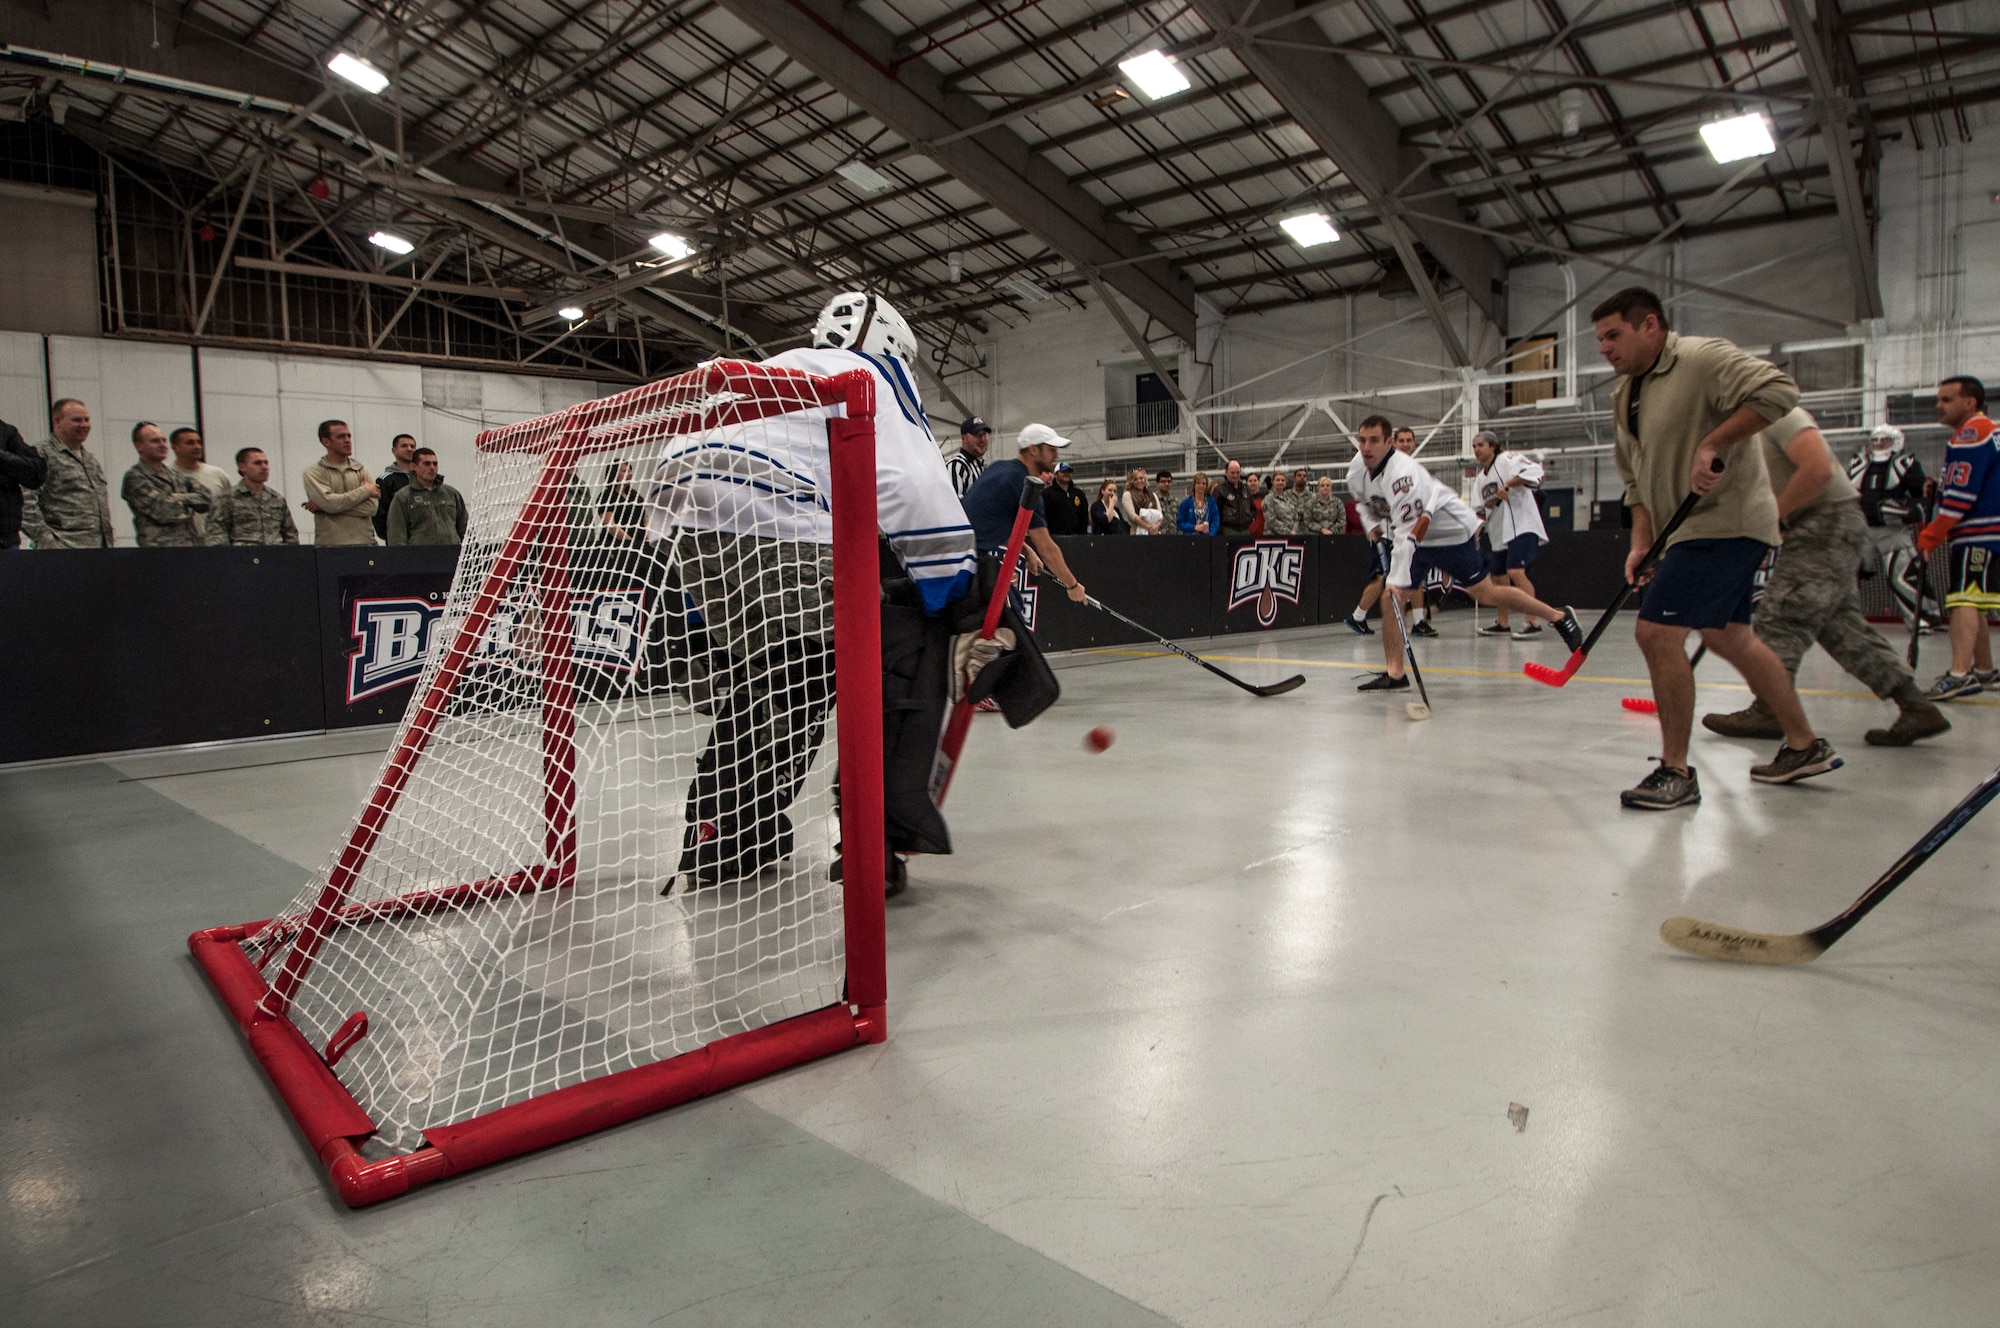 Senior Master Sergeant Bob Gaspar, 507th Operations Group superintendent of intelligence, stops a point blank shot from Oklahoma City Barons hockey player, Bradley Hunt during a floor hockey game January 14, 2014 in the Maintenance Squadron hangar.  Hunt was one of four Barons players to volunteer for the game here as part of a winning raffle by 507th Civil Engineering Squadron’s Senior Master Sgt. Daniel Bostwick.  Five members from the 507th and 137th Oklahoma Air National Guard Air Refueling Wings participated in the game as dozens more took time to come watch.  The four Barons hockey players along with two cheerleaders toured a KC-135R Stratotanker prior to the game.  The Oklahoma City Barons are part of the National Hockey League’s Edmonton Oilers.  (U.S. Air Force photo/Senior Airman Mark Hybers)